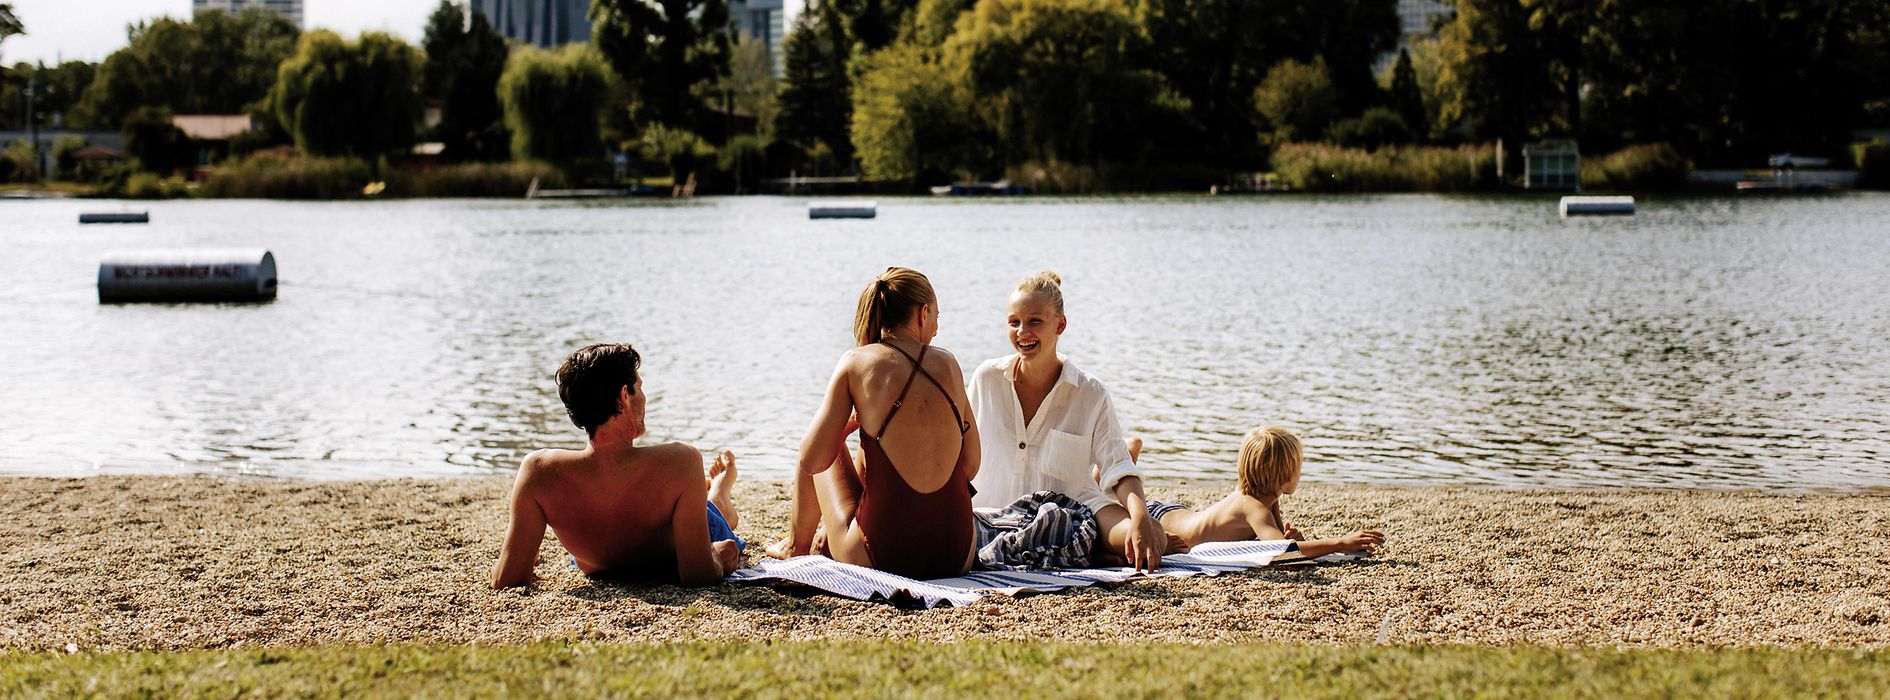 Gänsehäufel lido on the Old Danube: a man, two women, and a child on the beach